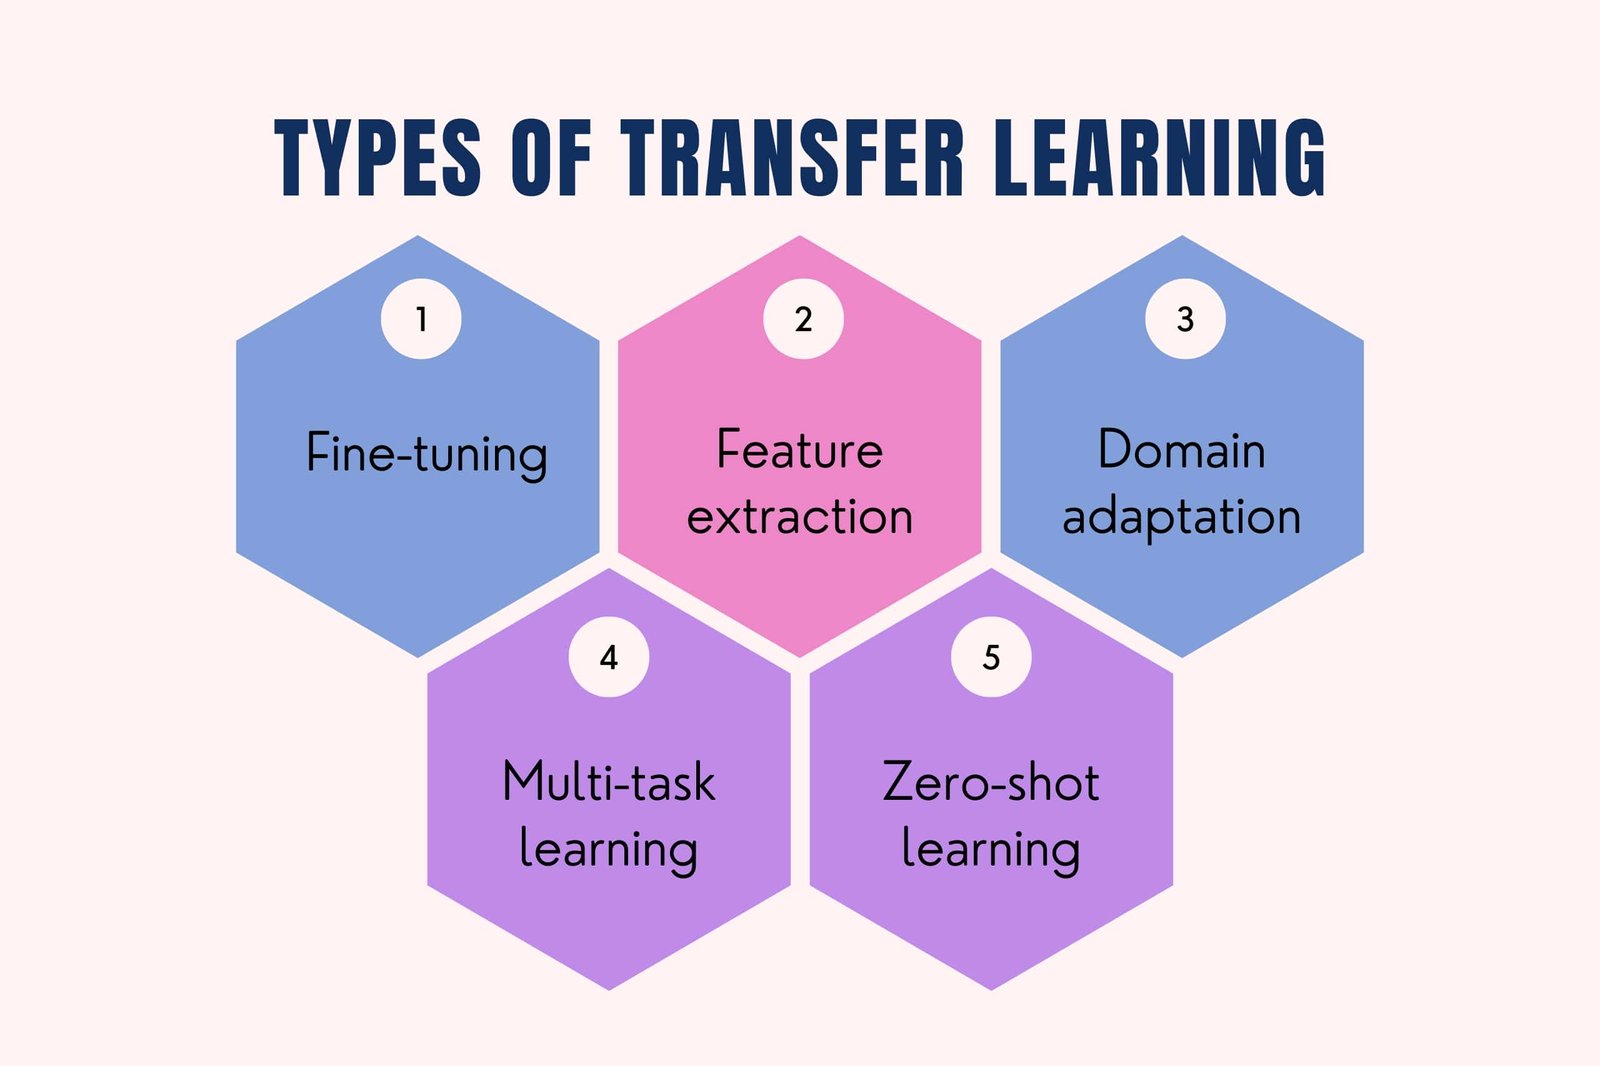 case study of transfer learning